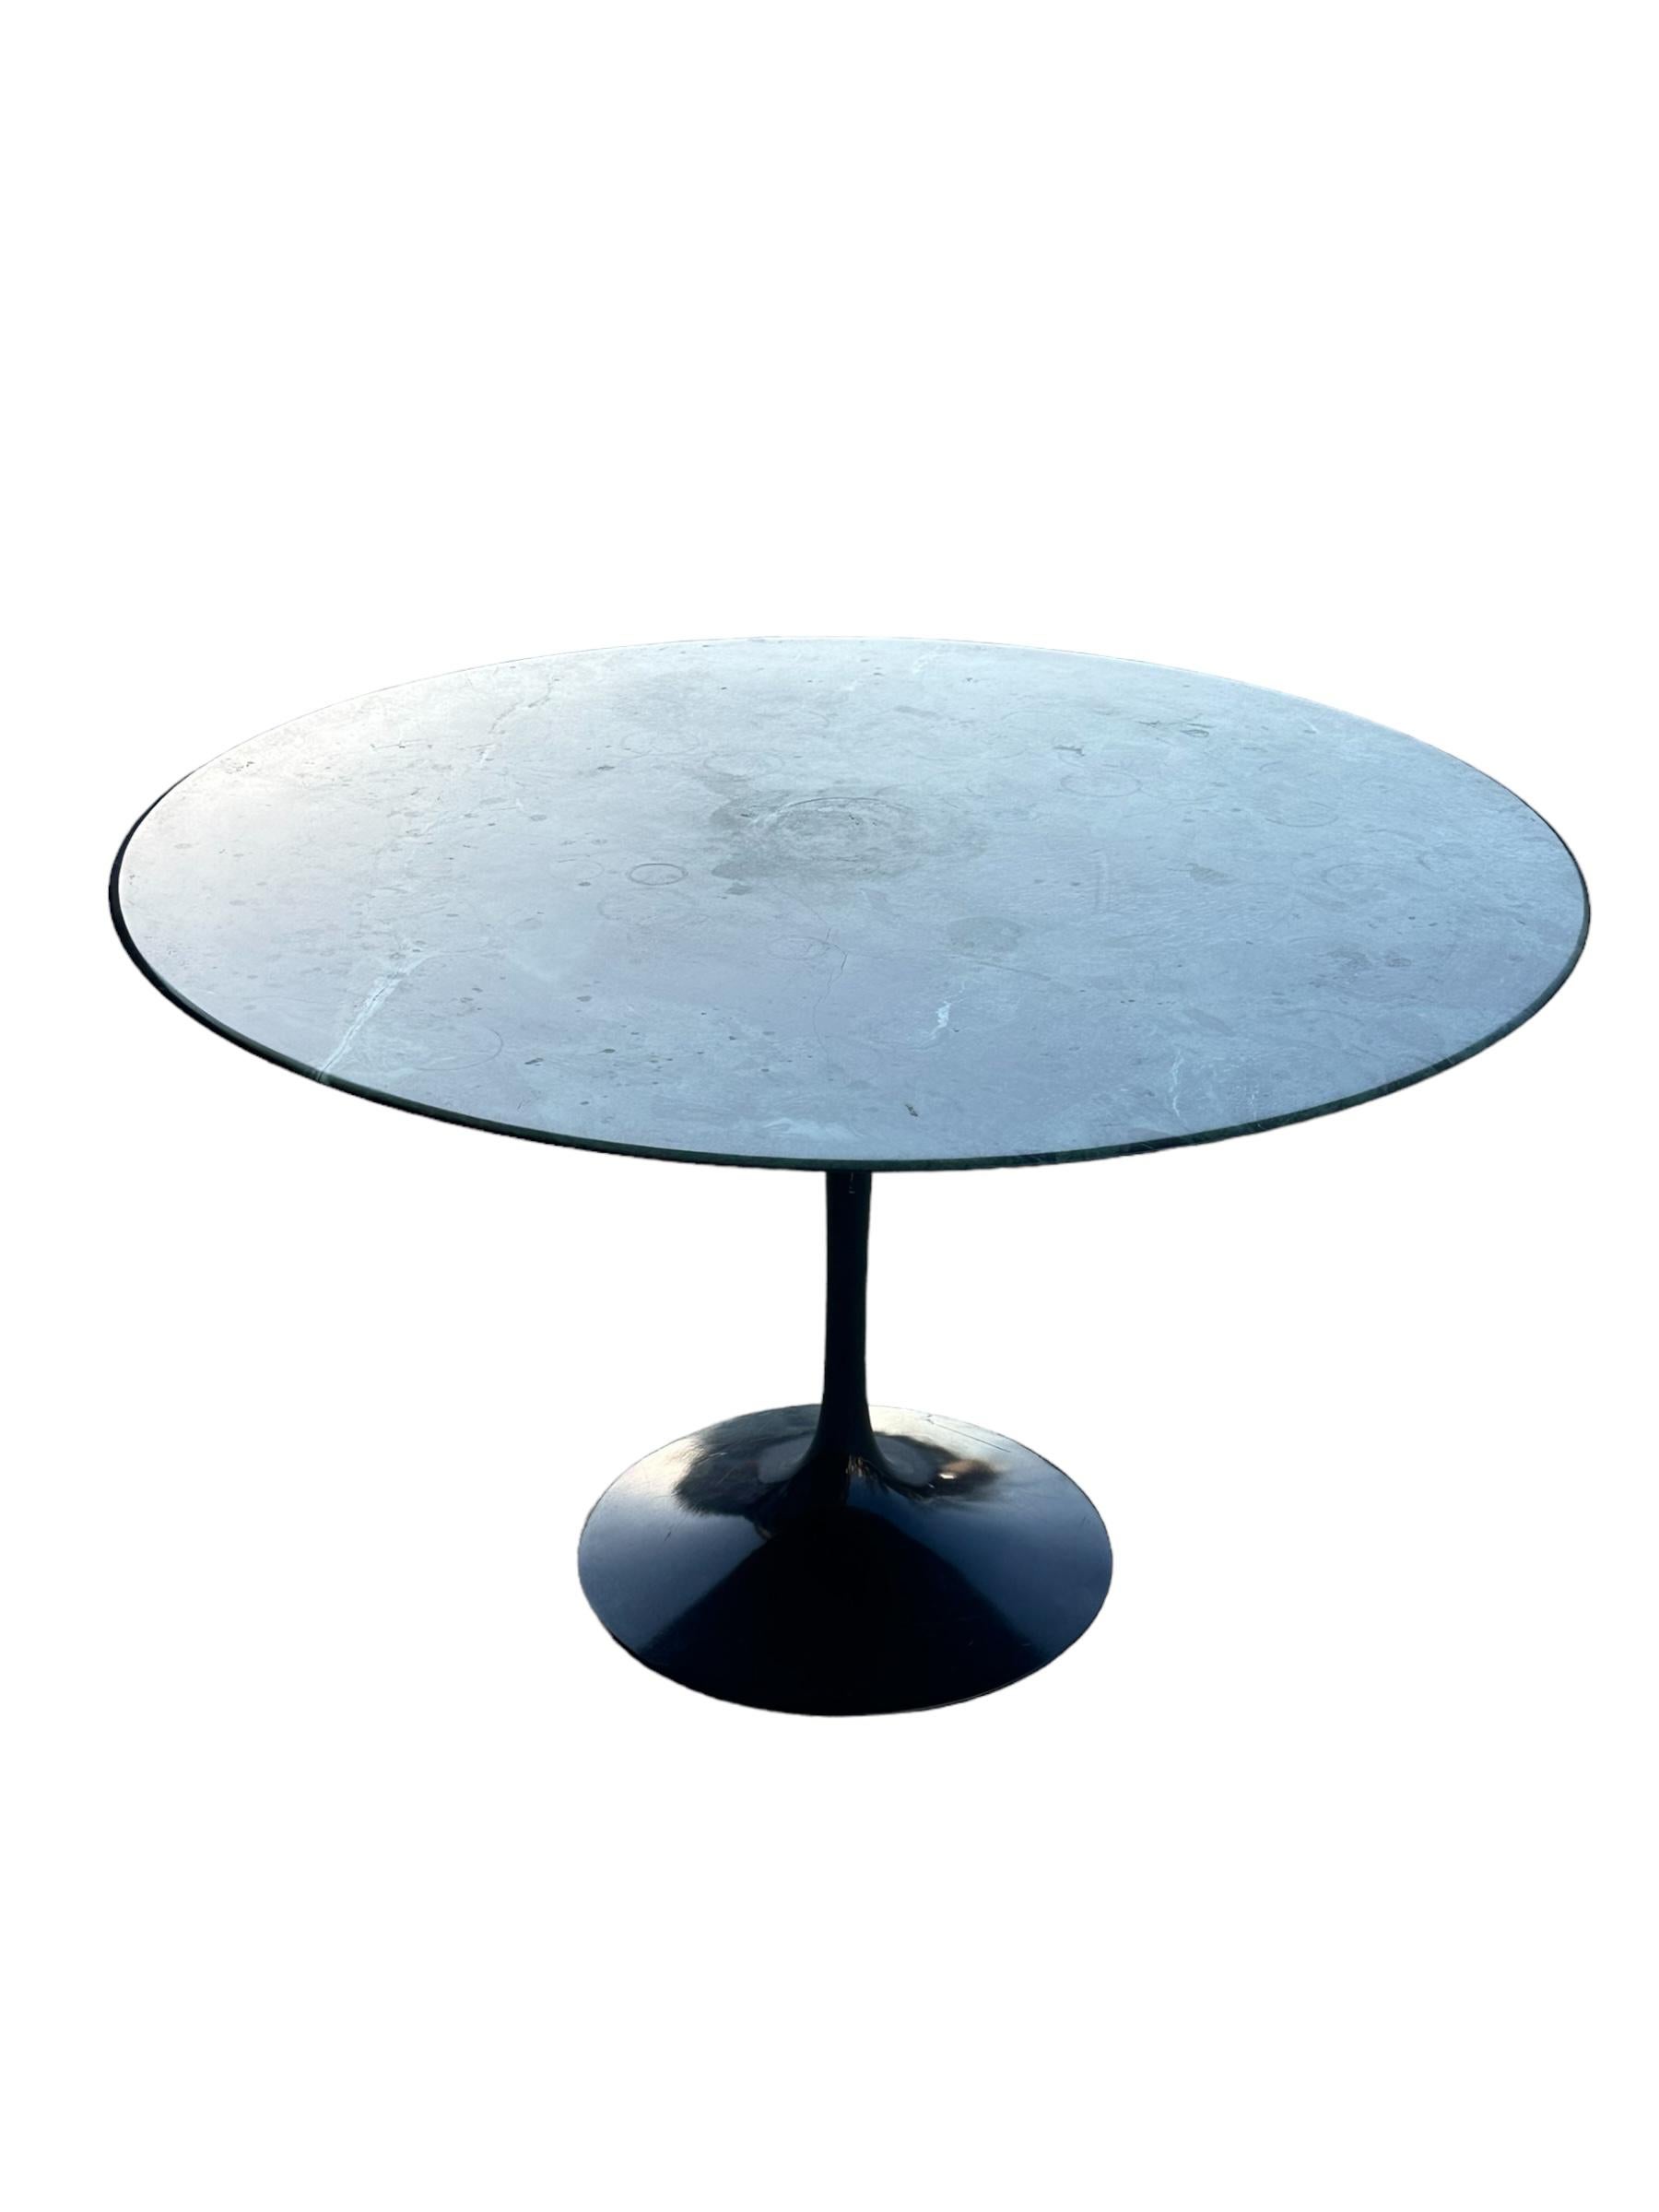 Spectacular Eero Saarinen for Knoll Tulip Dining Table in Verde Alpi Marble For Sale 13